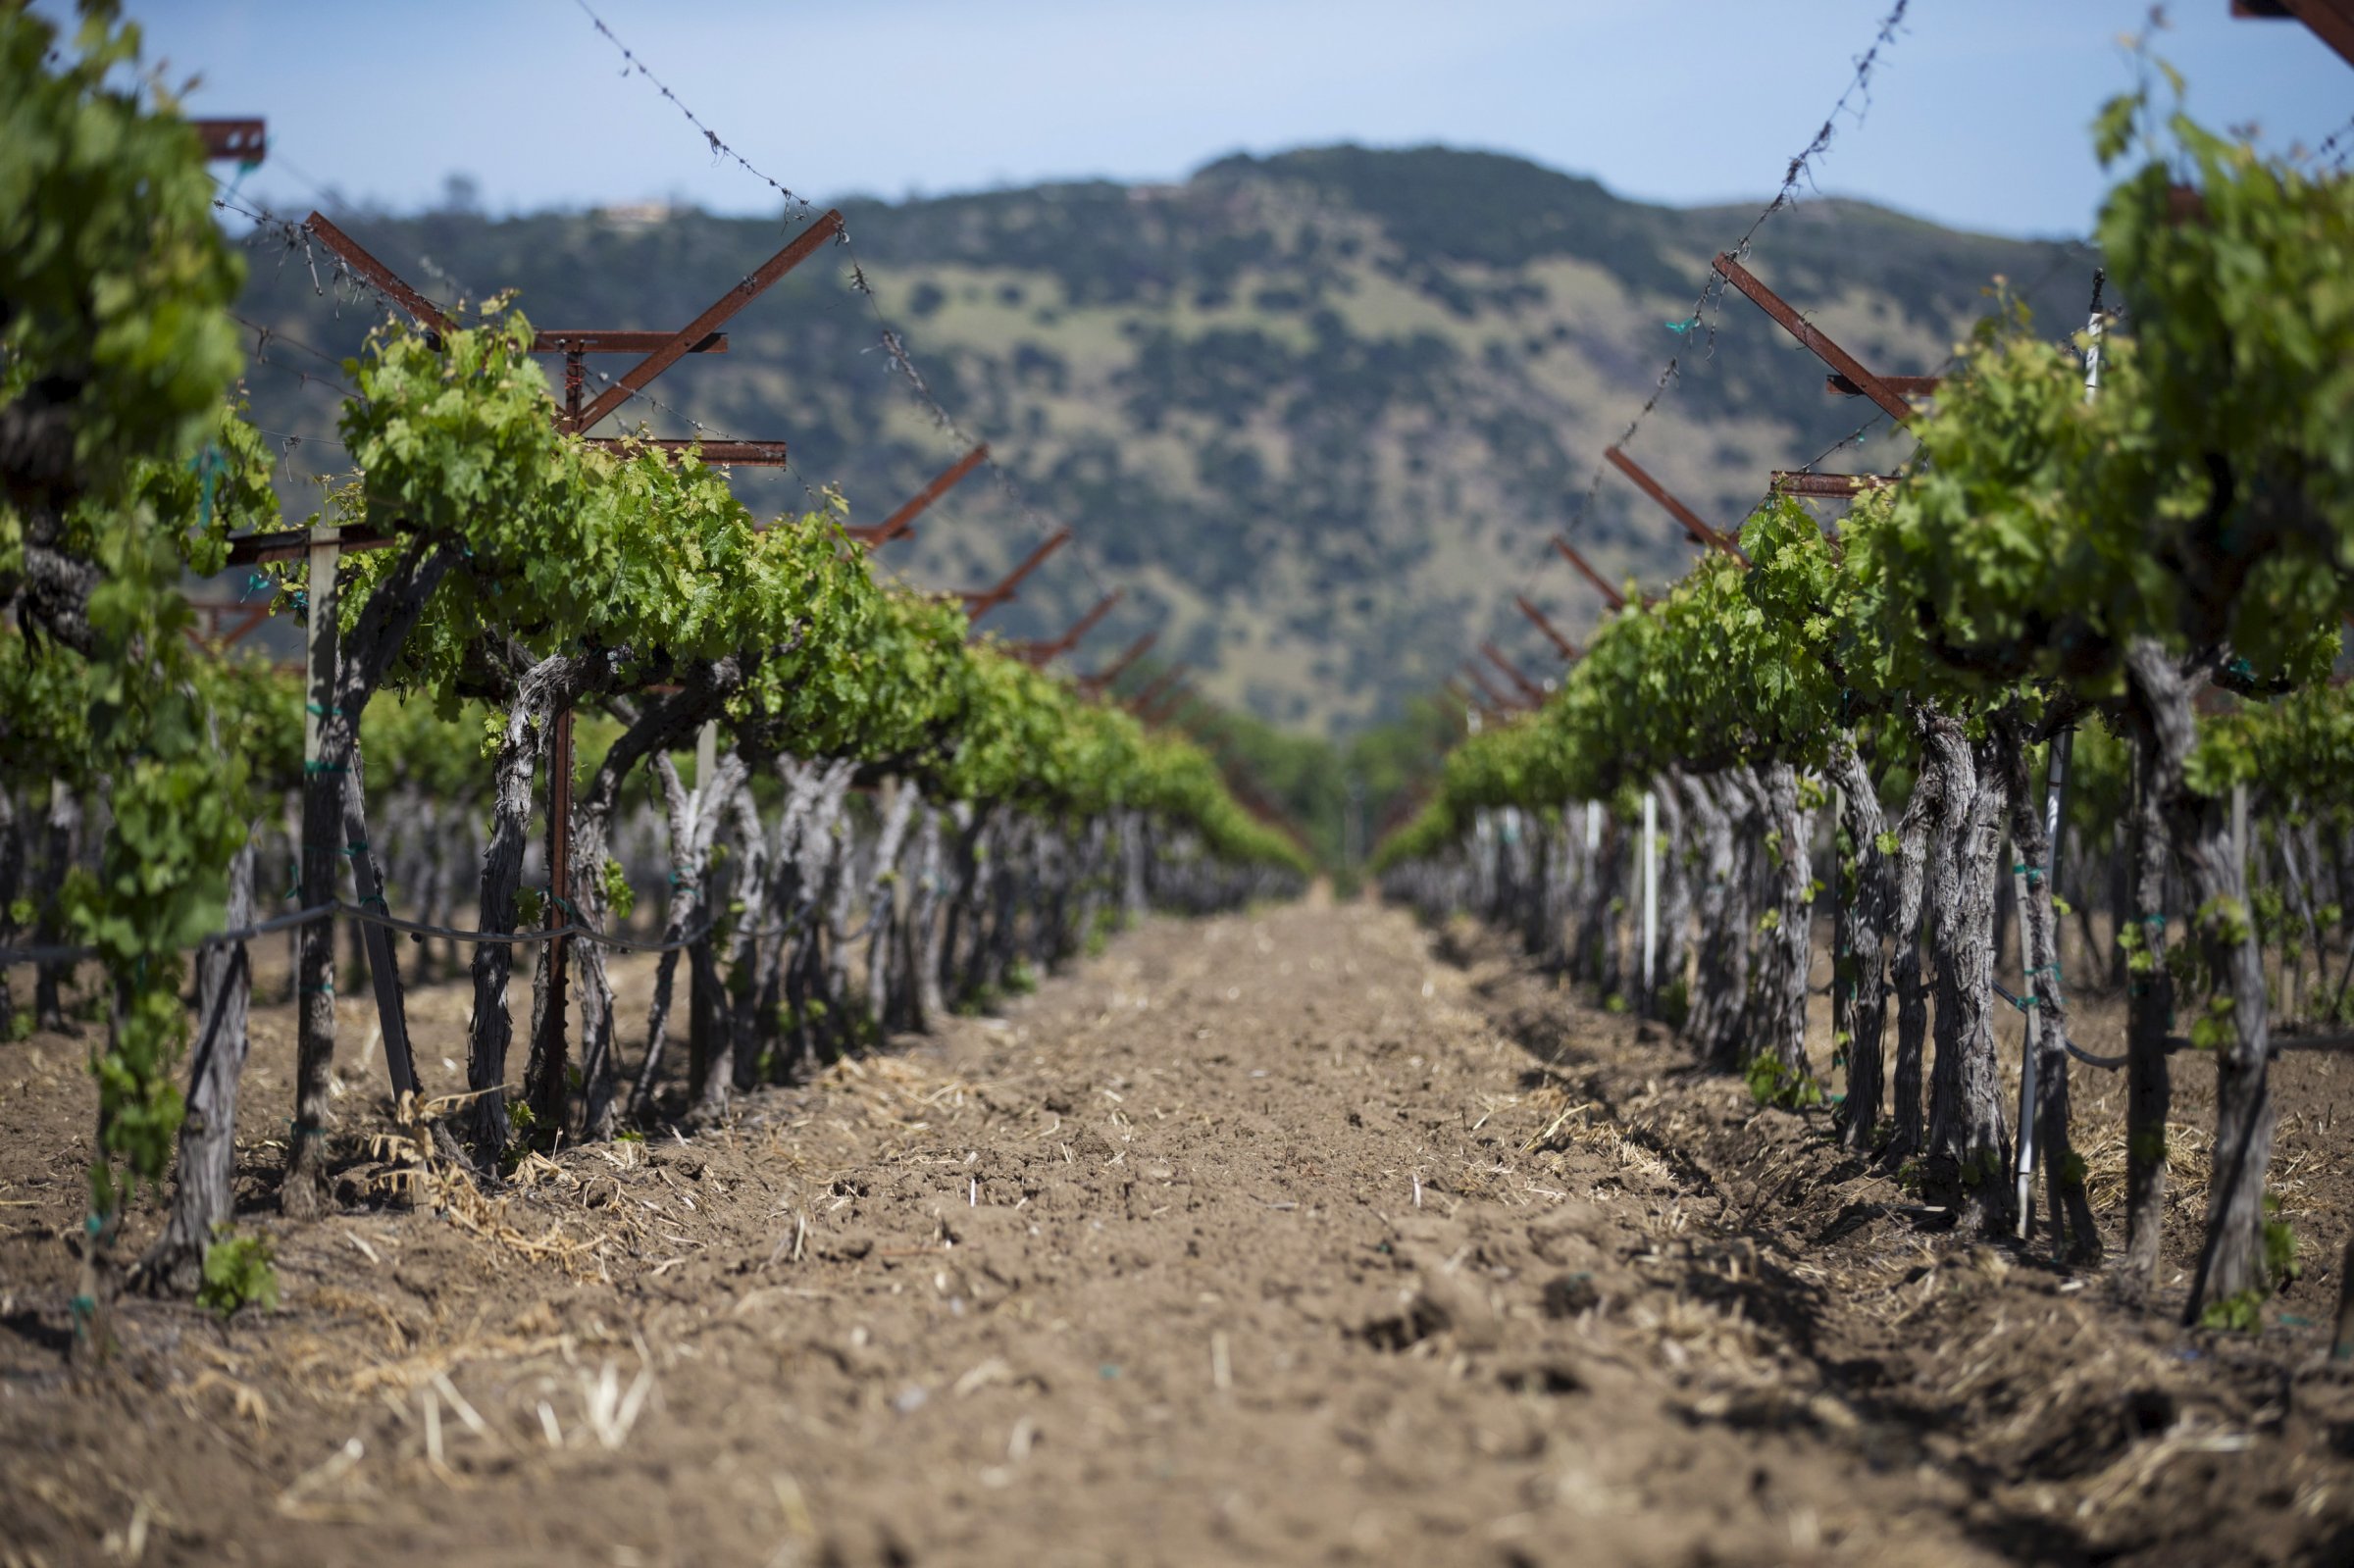 Dry earth is seen between rows of grapevines in Napa, California